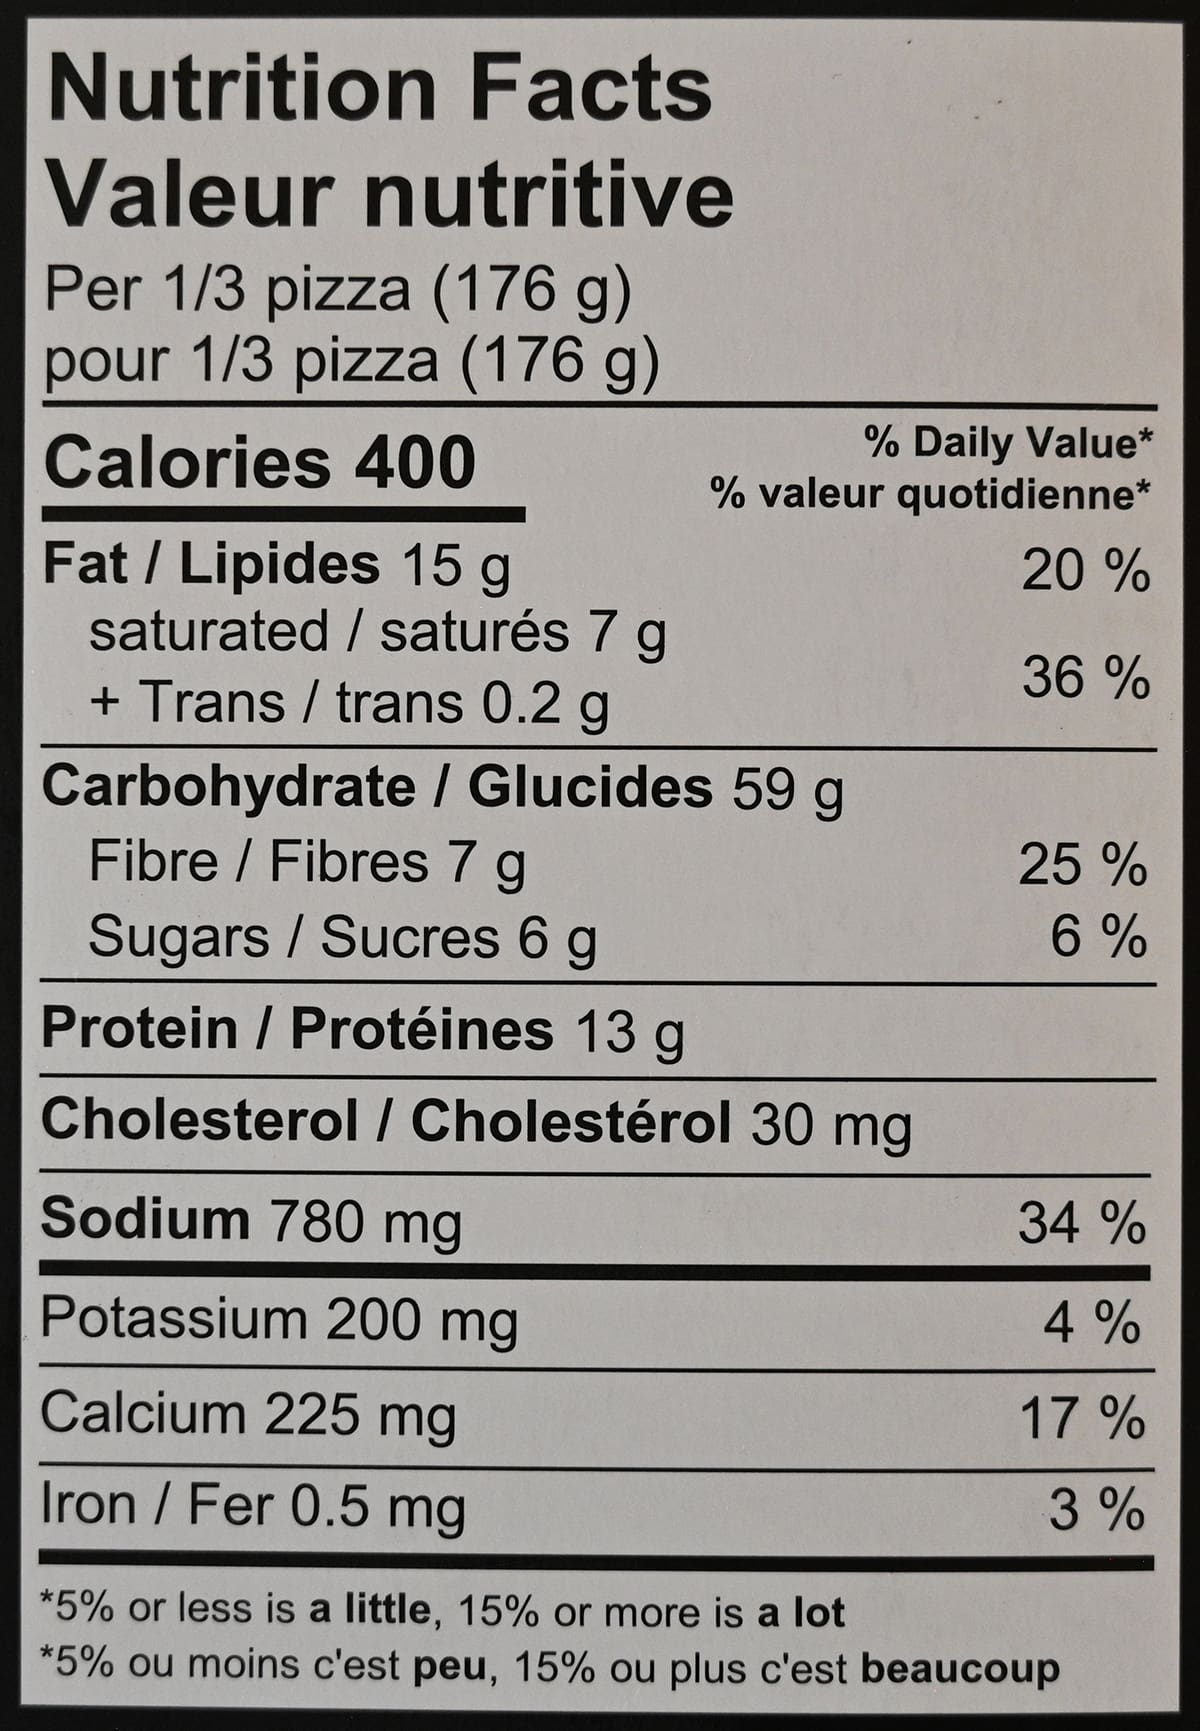 Image of the nutrition facts for the pizza from the box.